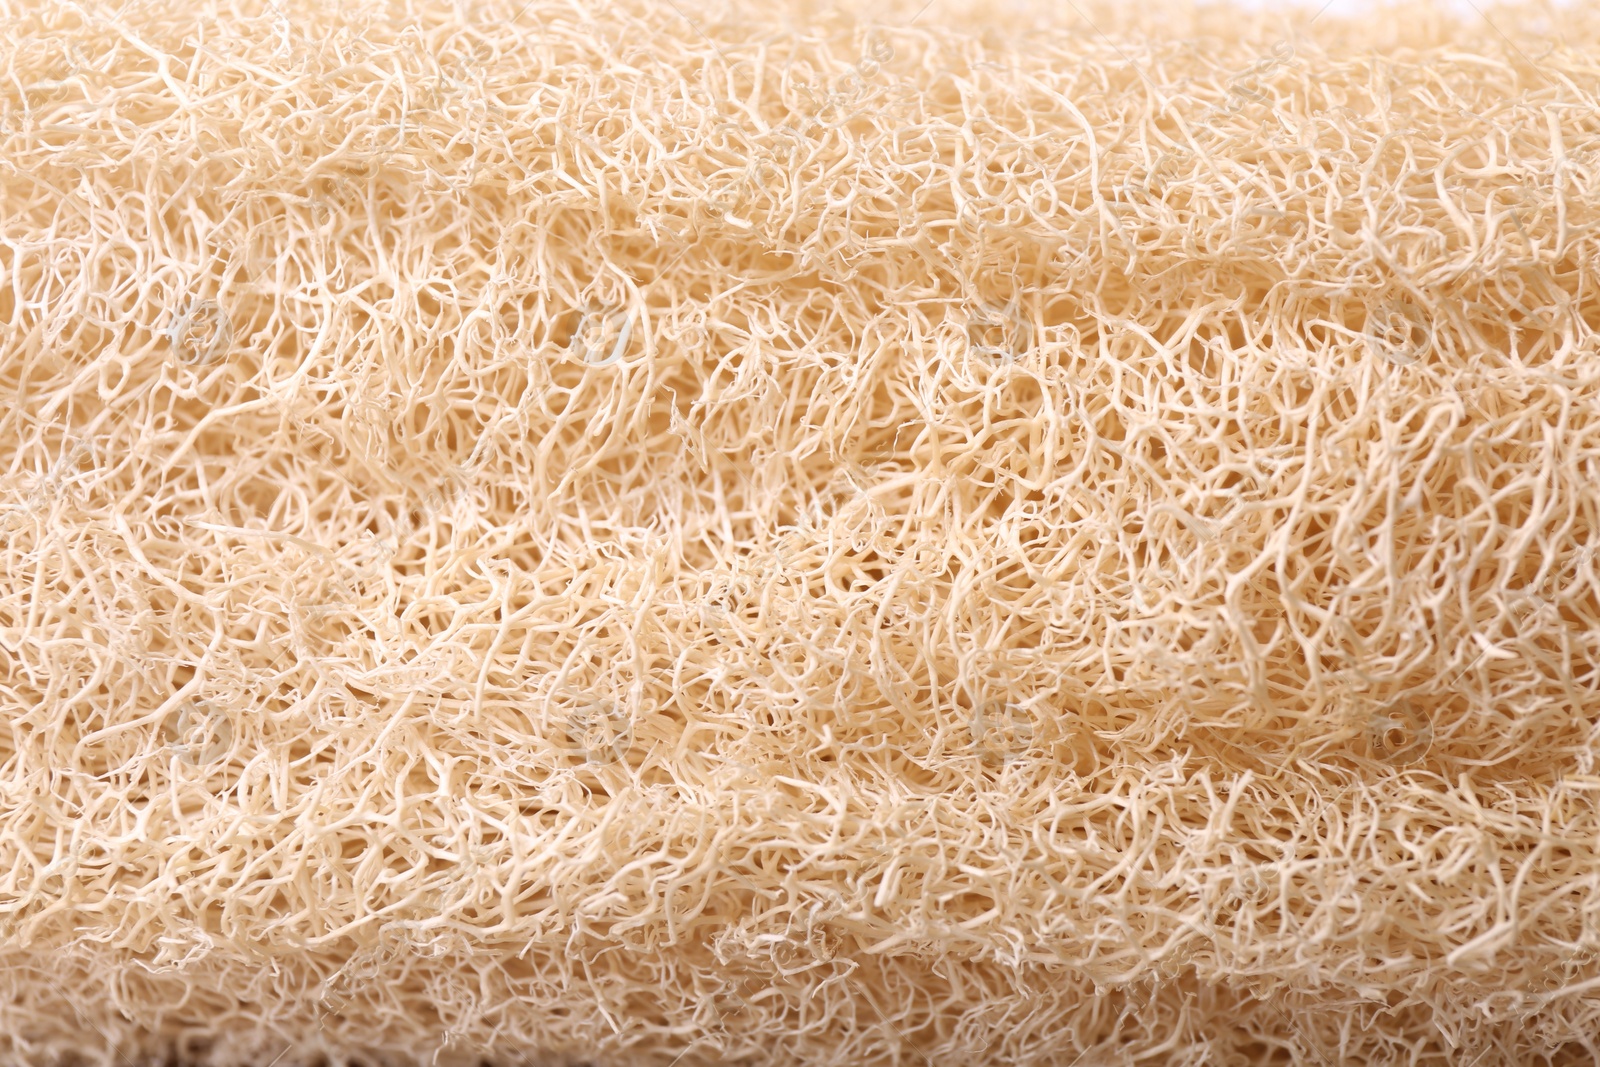 Photo of Loofah sponge as background, closeup. Personal hygiene product